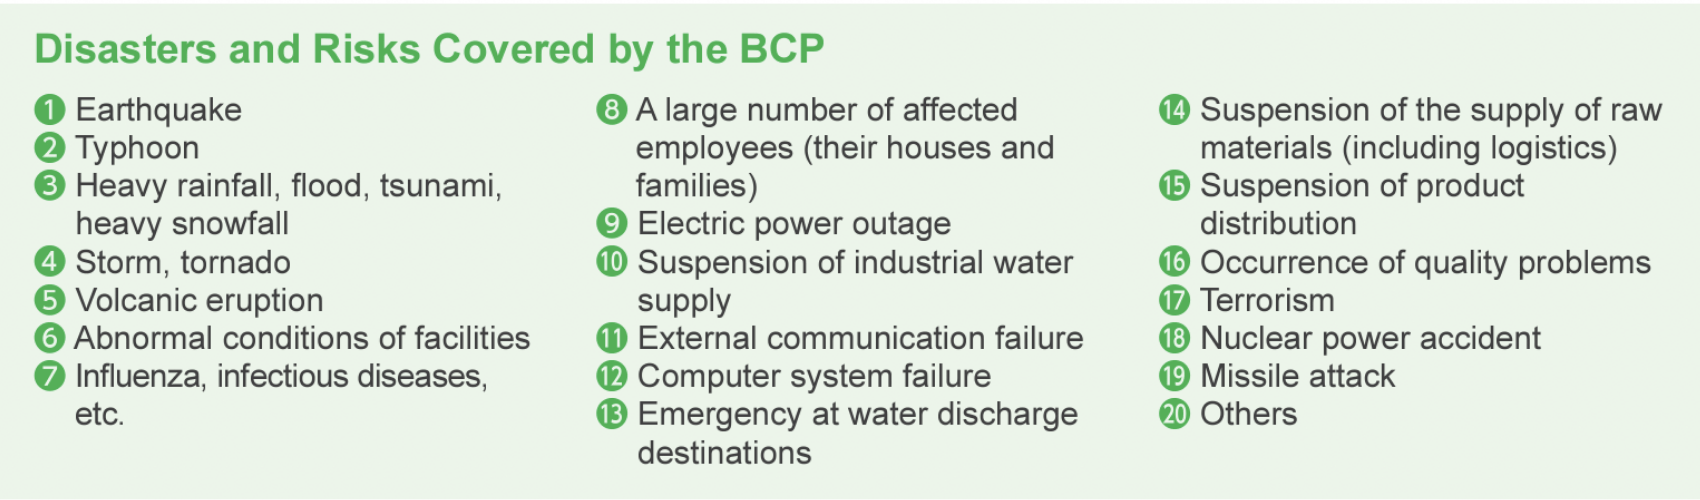 disasters and risks covered by the BCP